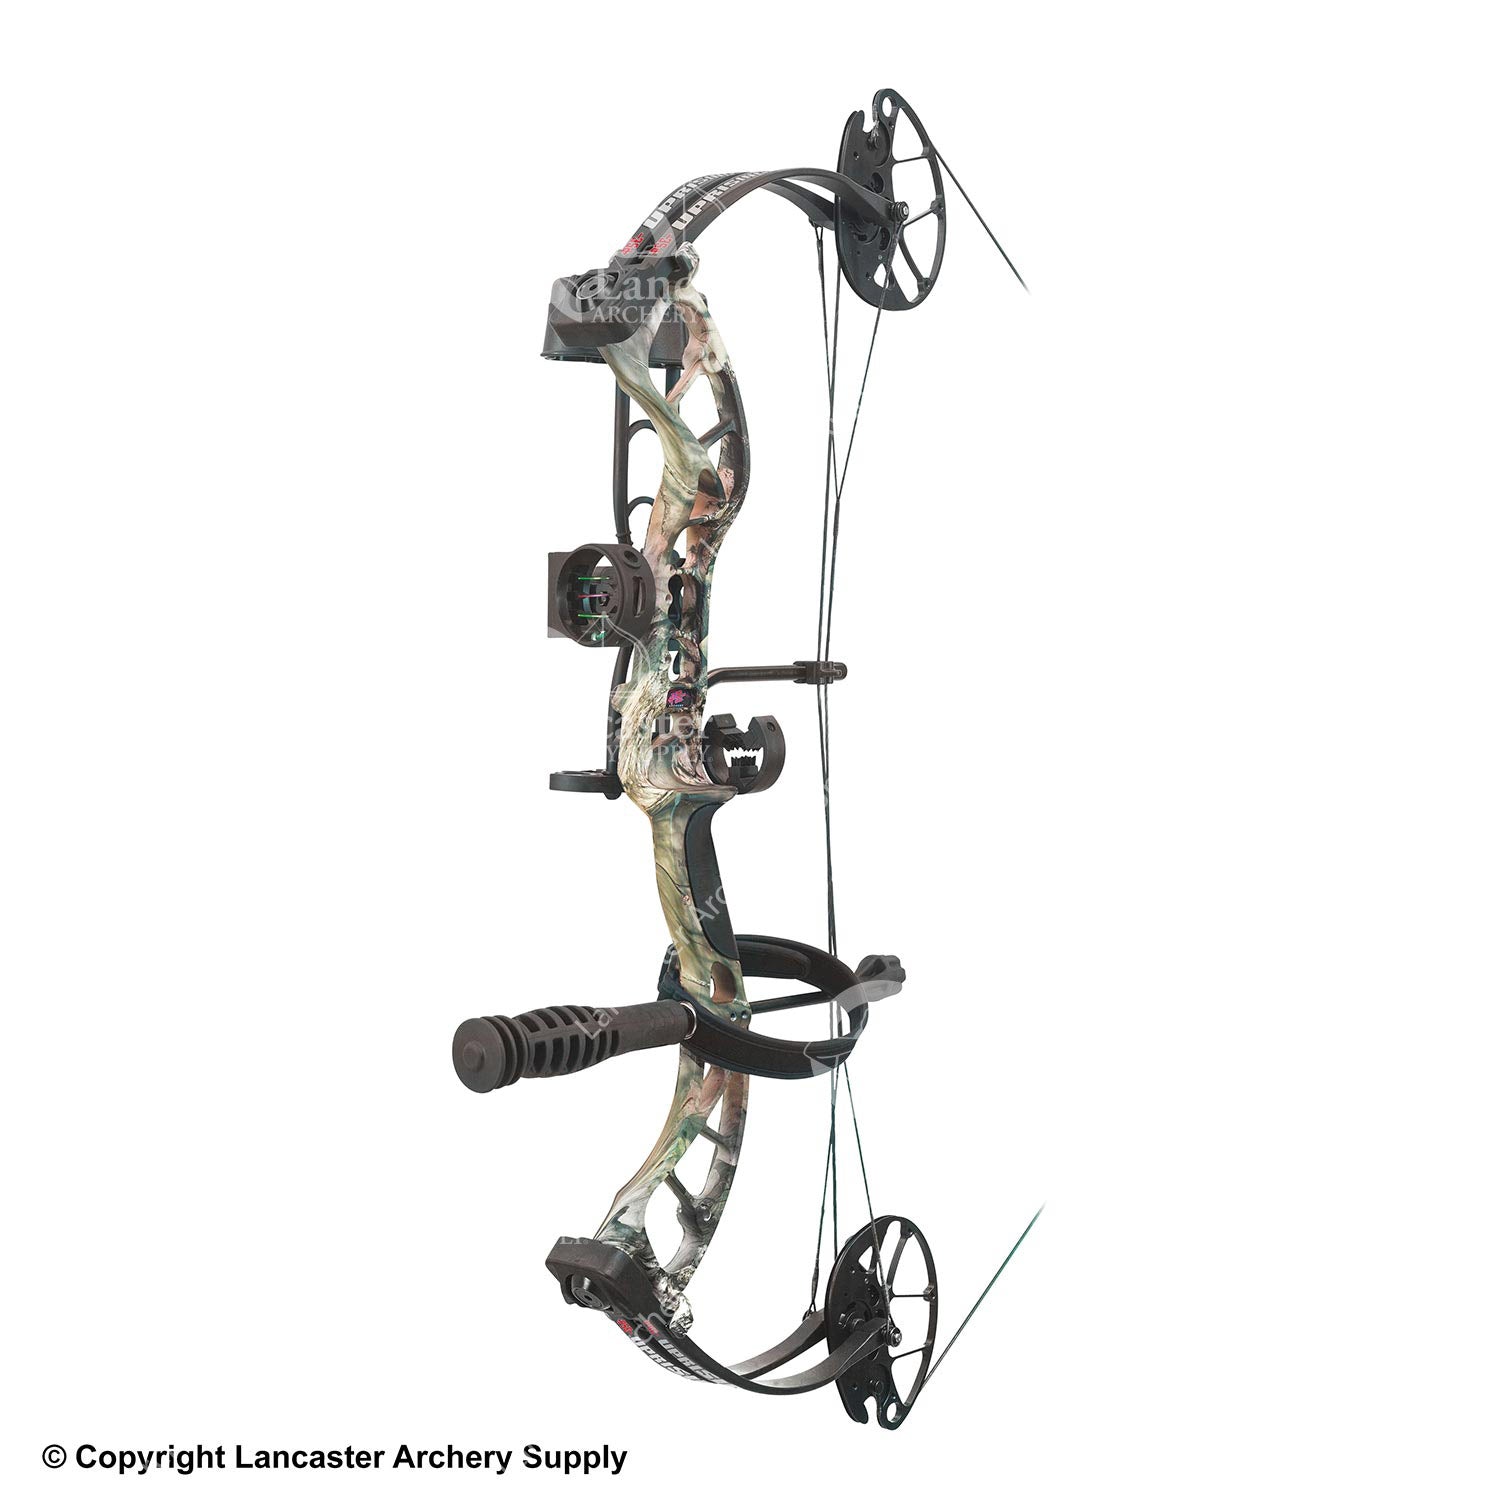 2019 PSE Uprising Compound Bow Package